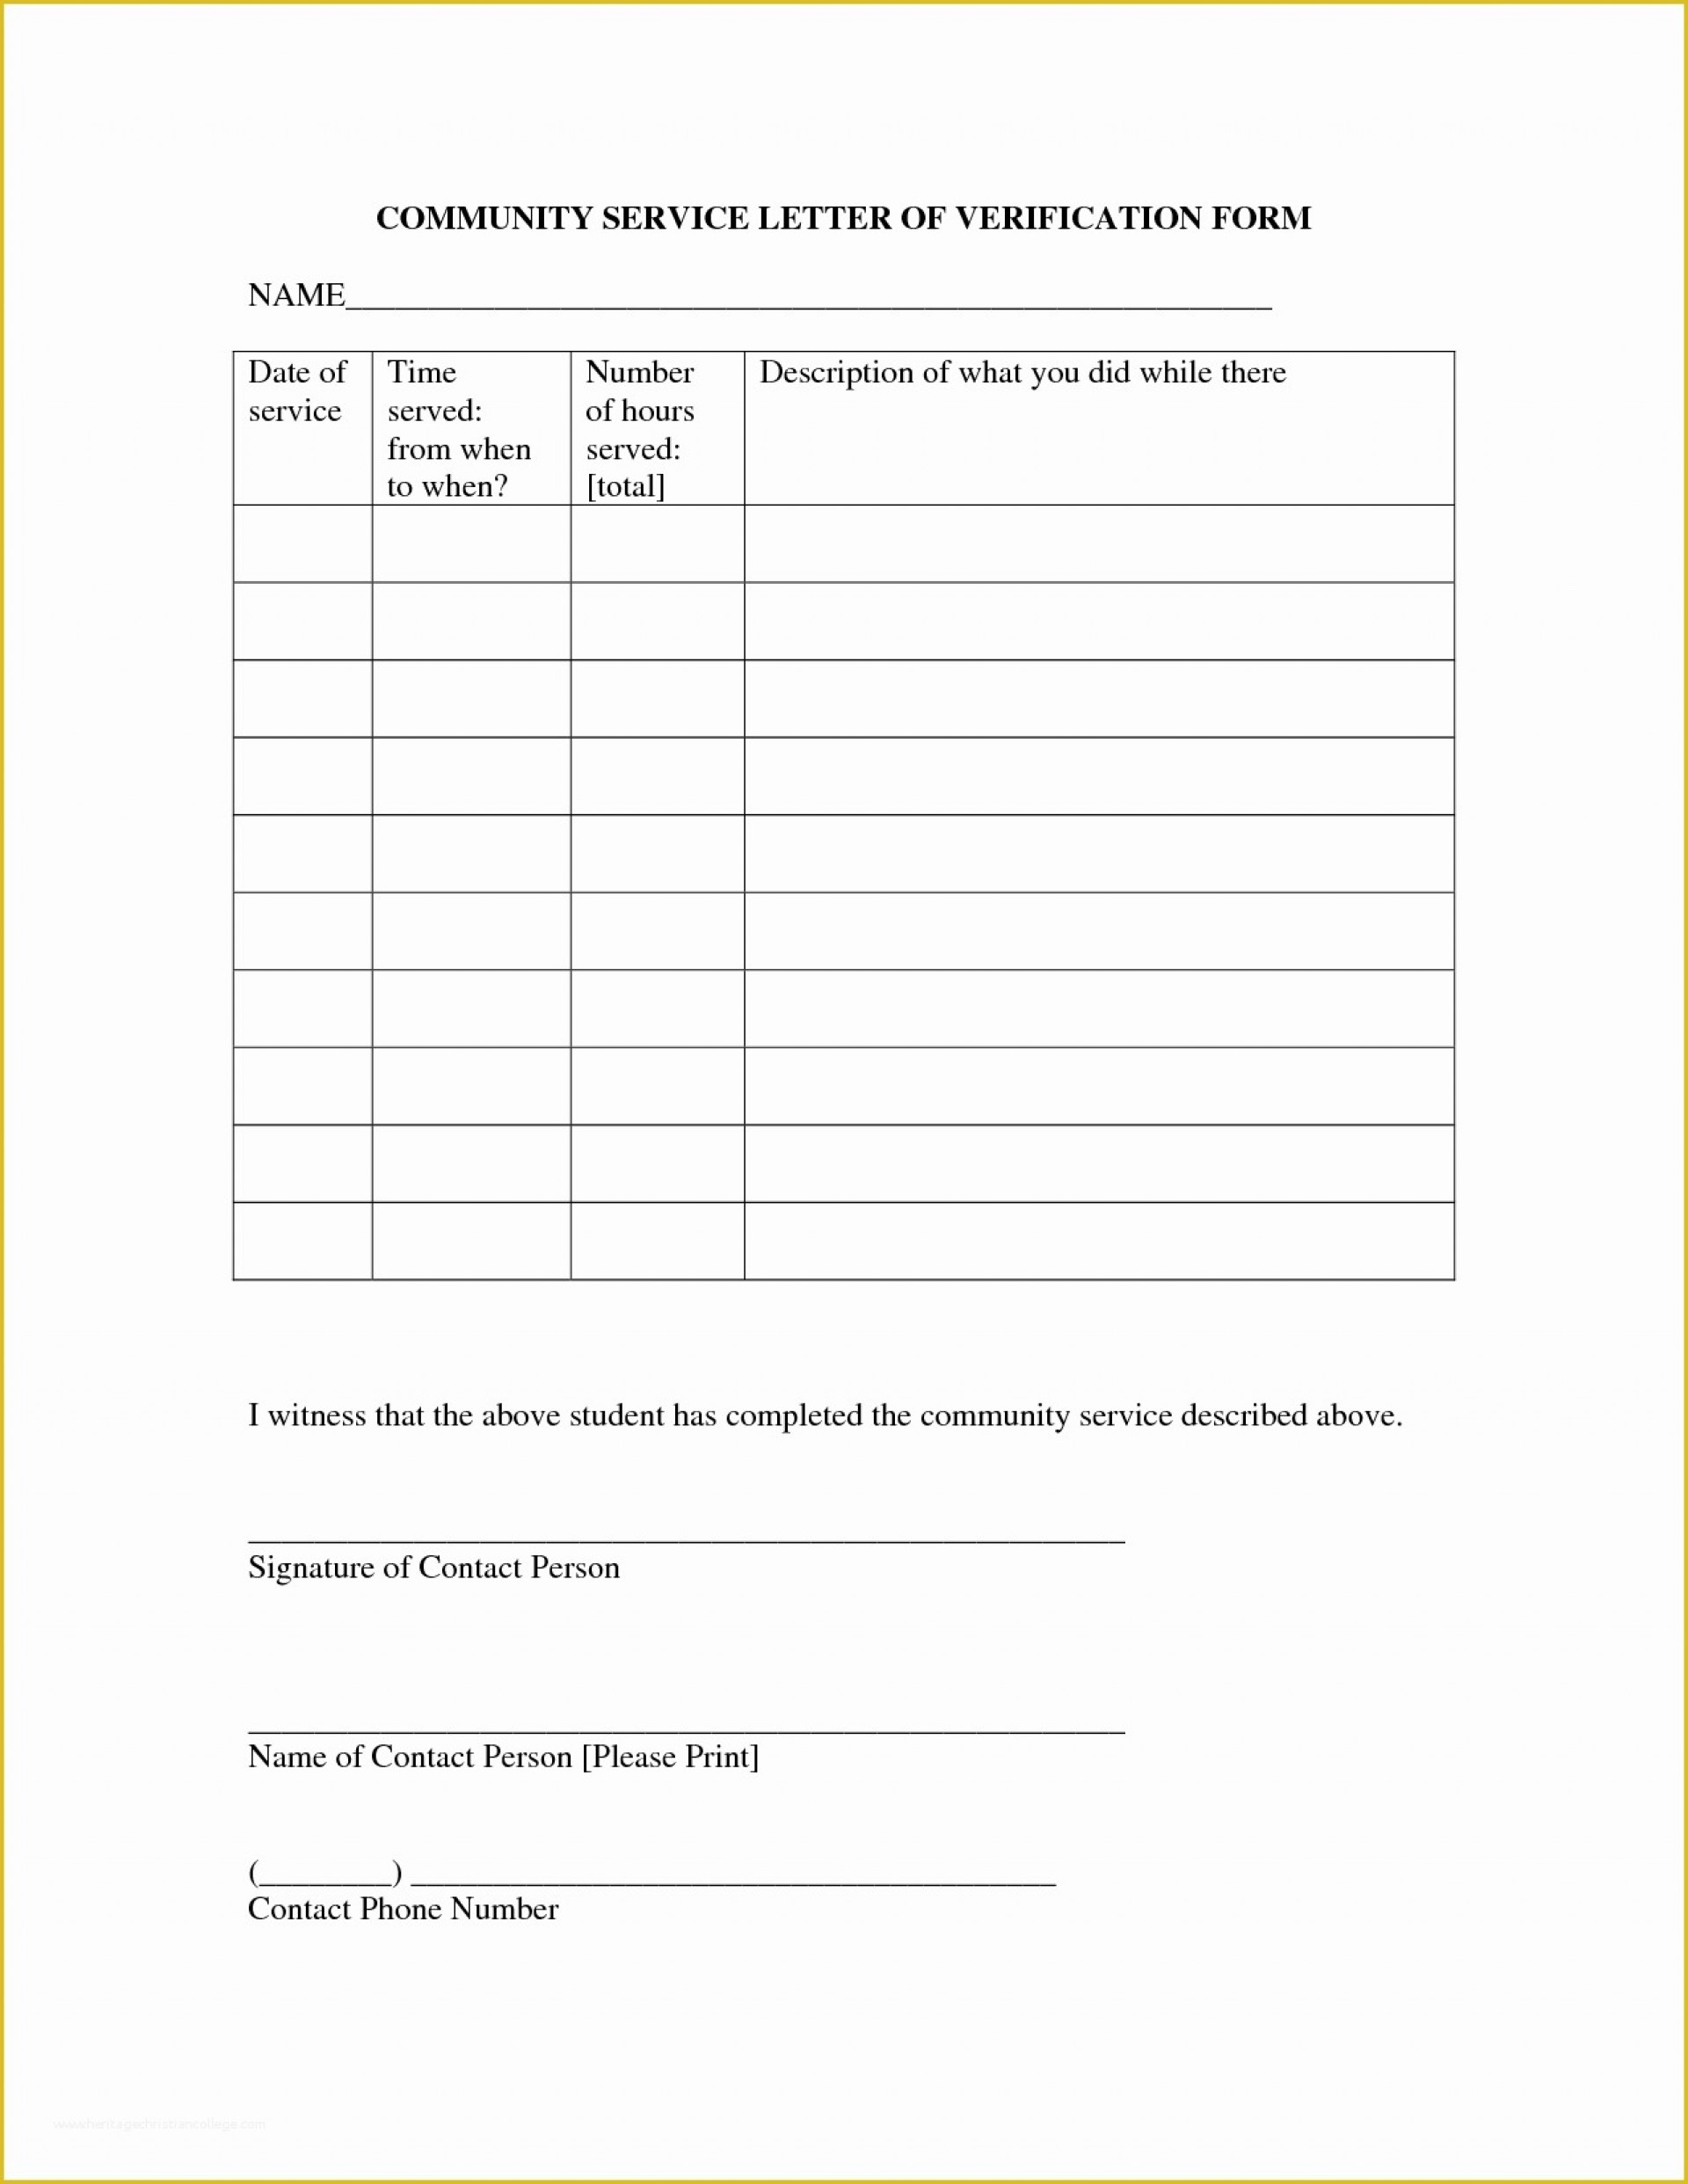 024 Volunteer Hours Form Template Application Unbelievable With Regard To Community Service Template Word